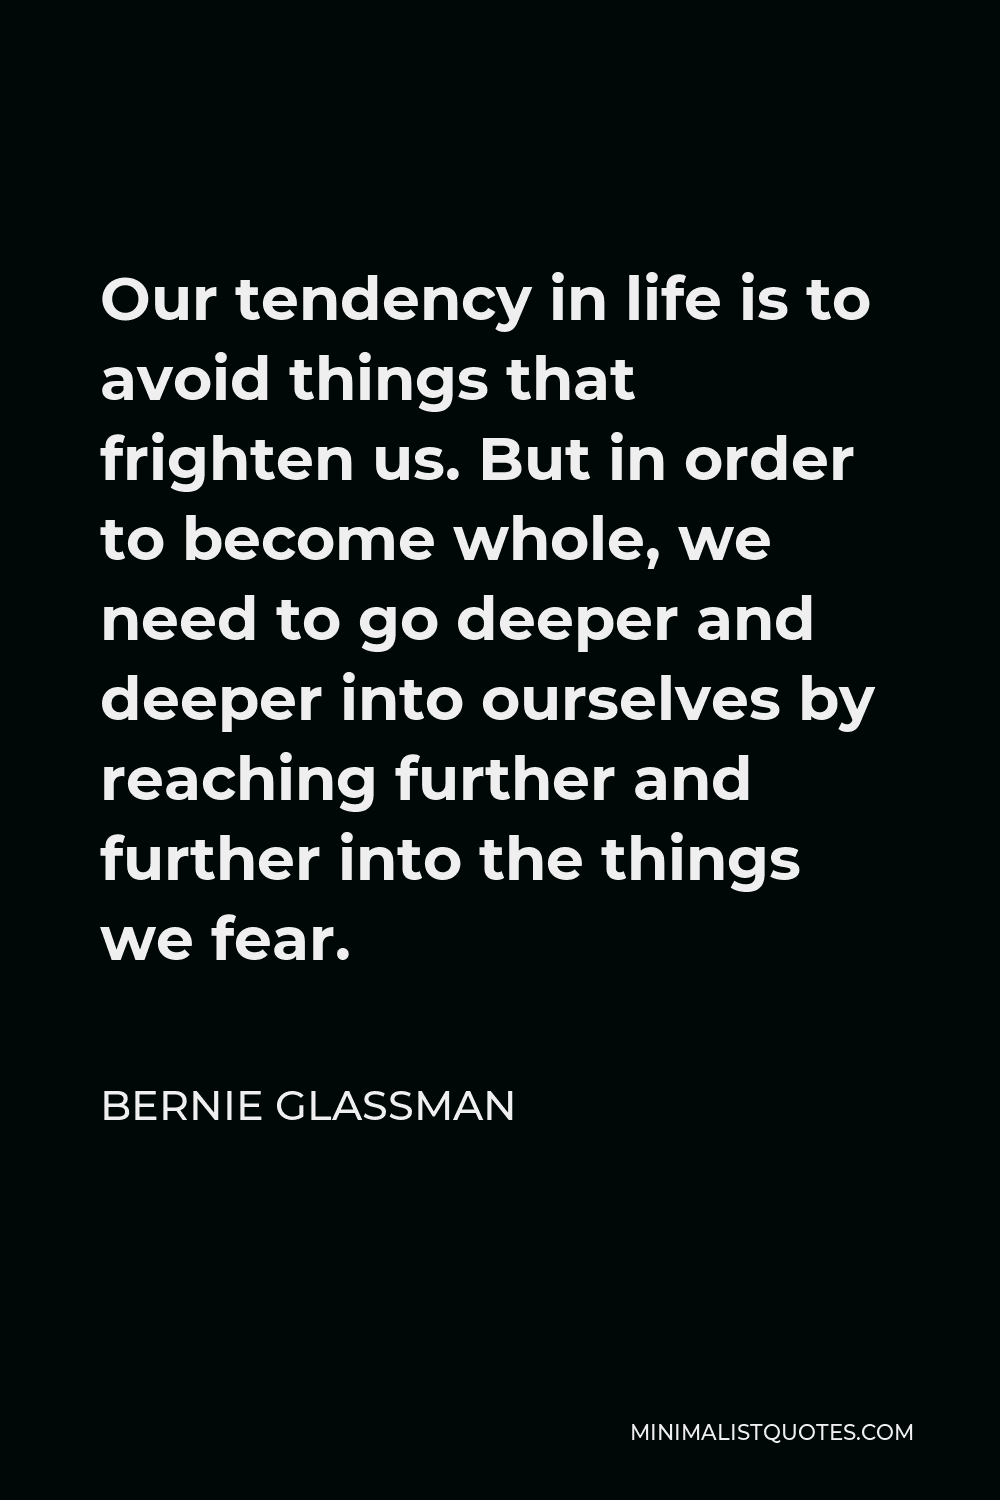 Bernie Glassman Quote - Our tendency in life is to avoid things that frighten us. But in order to become whole, we need to go deeper and deeper into ourselves by reaching further and further into the things we fear.